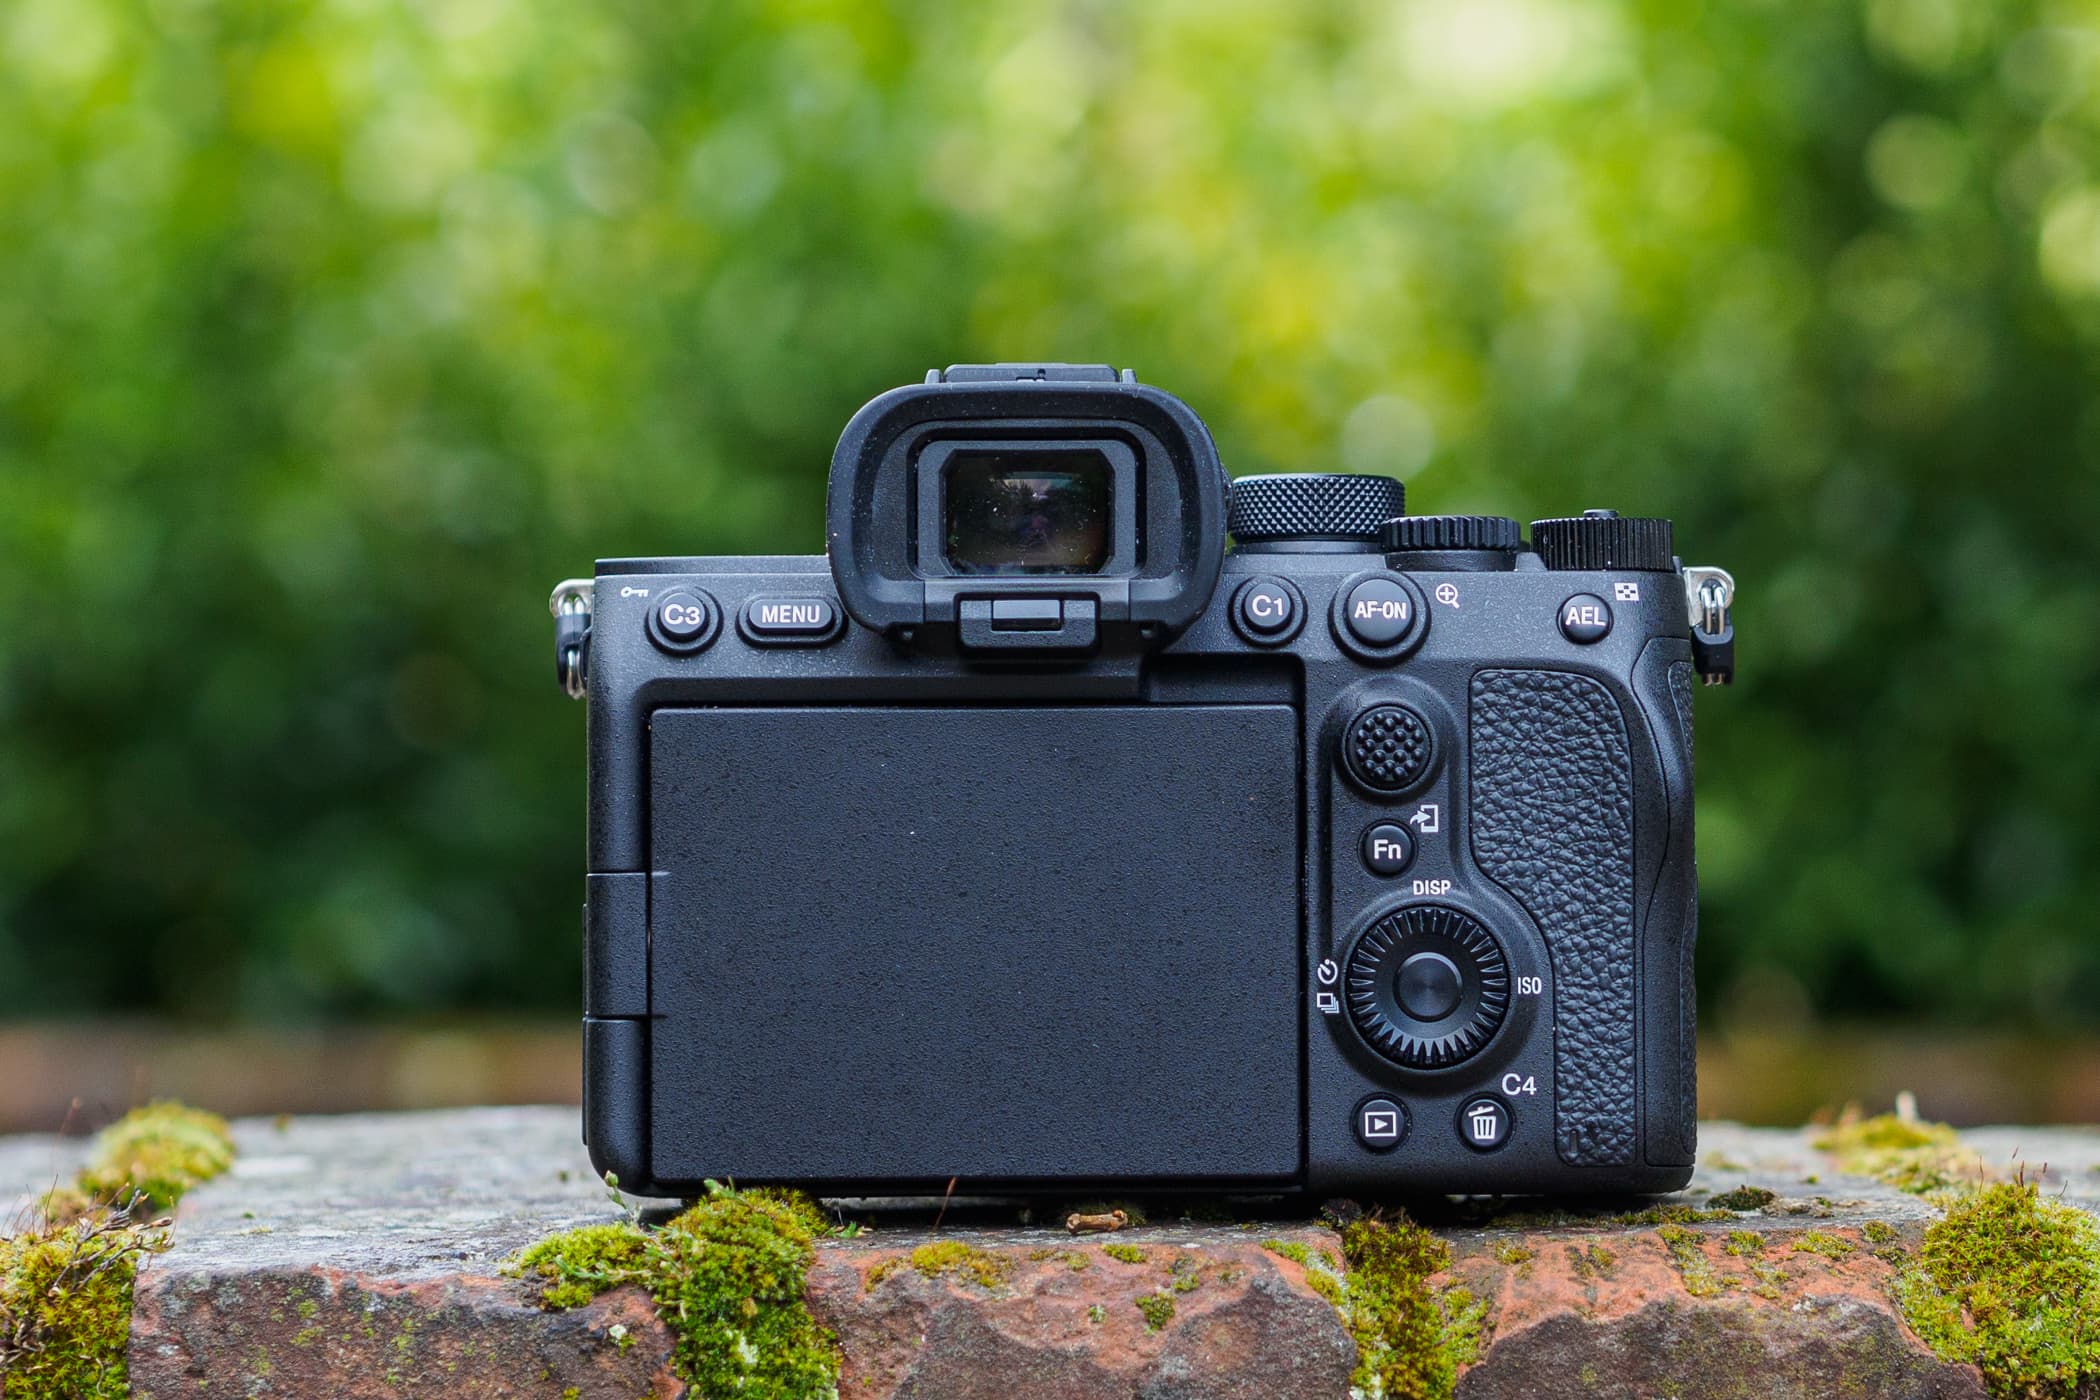 Sony A7S III review